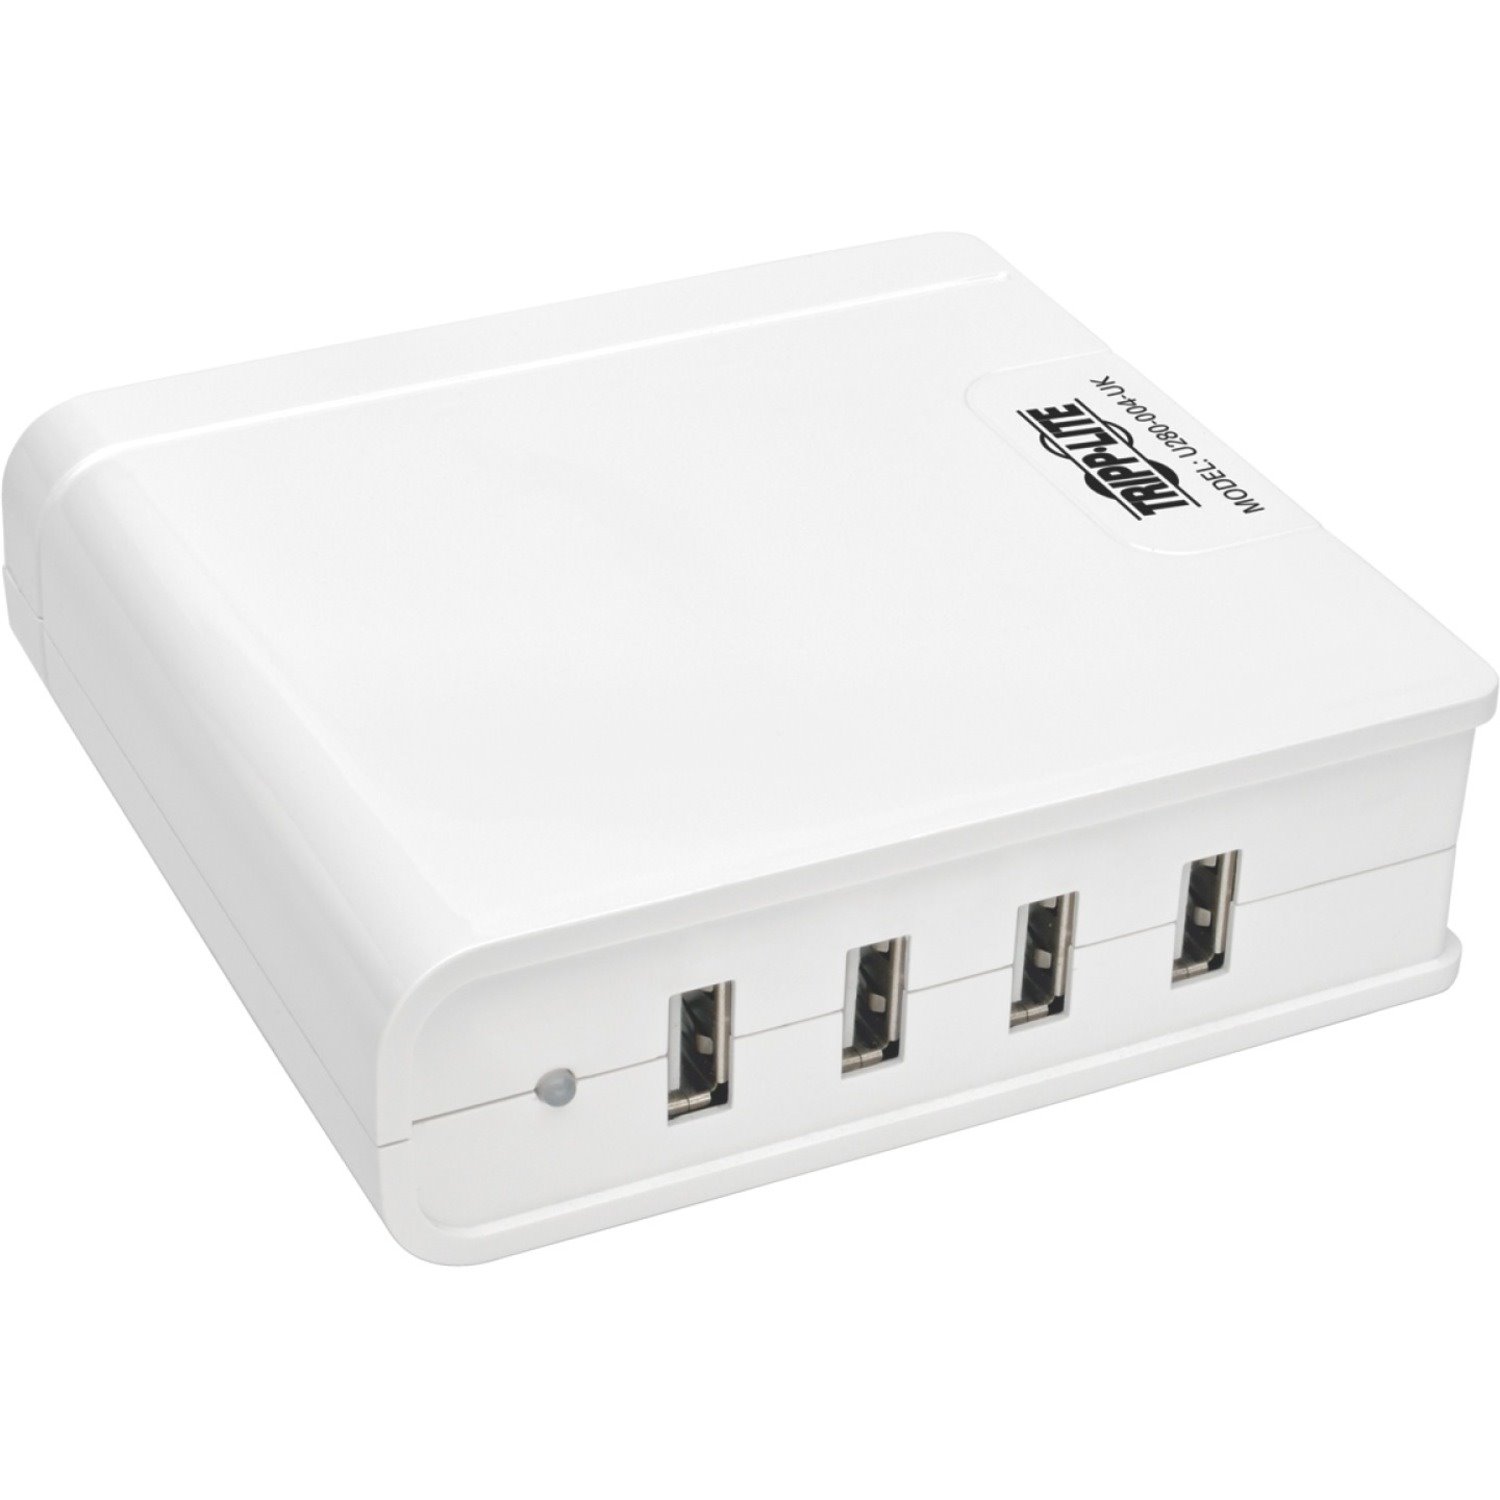 Tripp Lite by Eaton 4-Port USB Charging Station, 5V 6A/30W USB Charger Output, UK Version